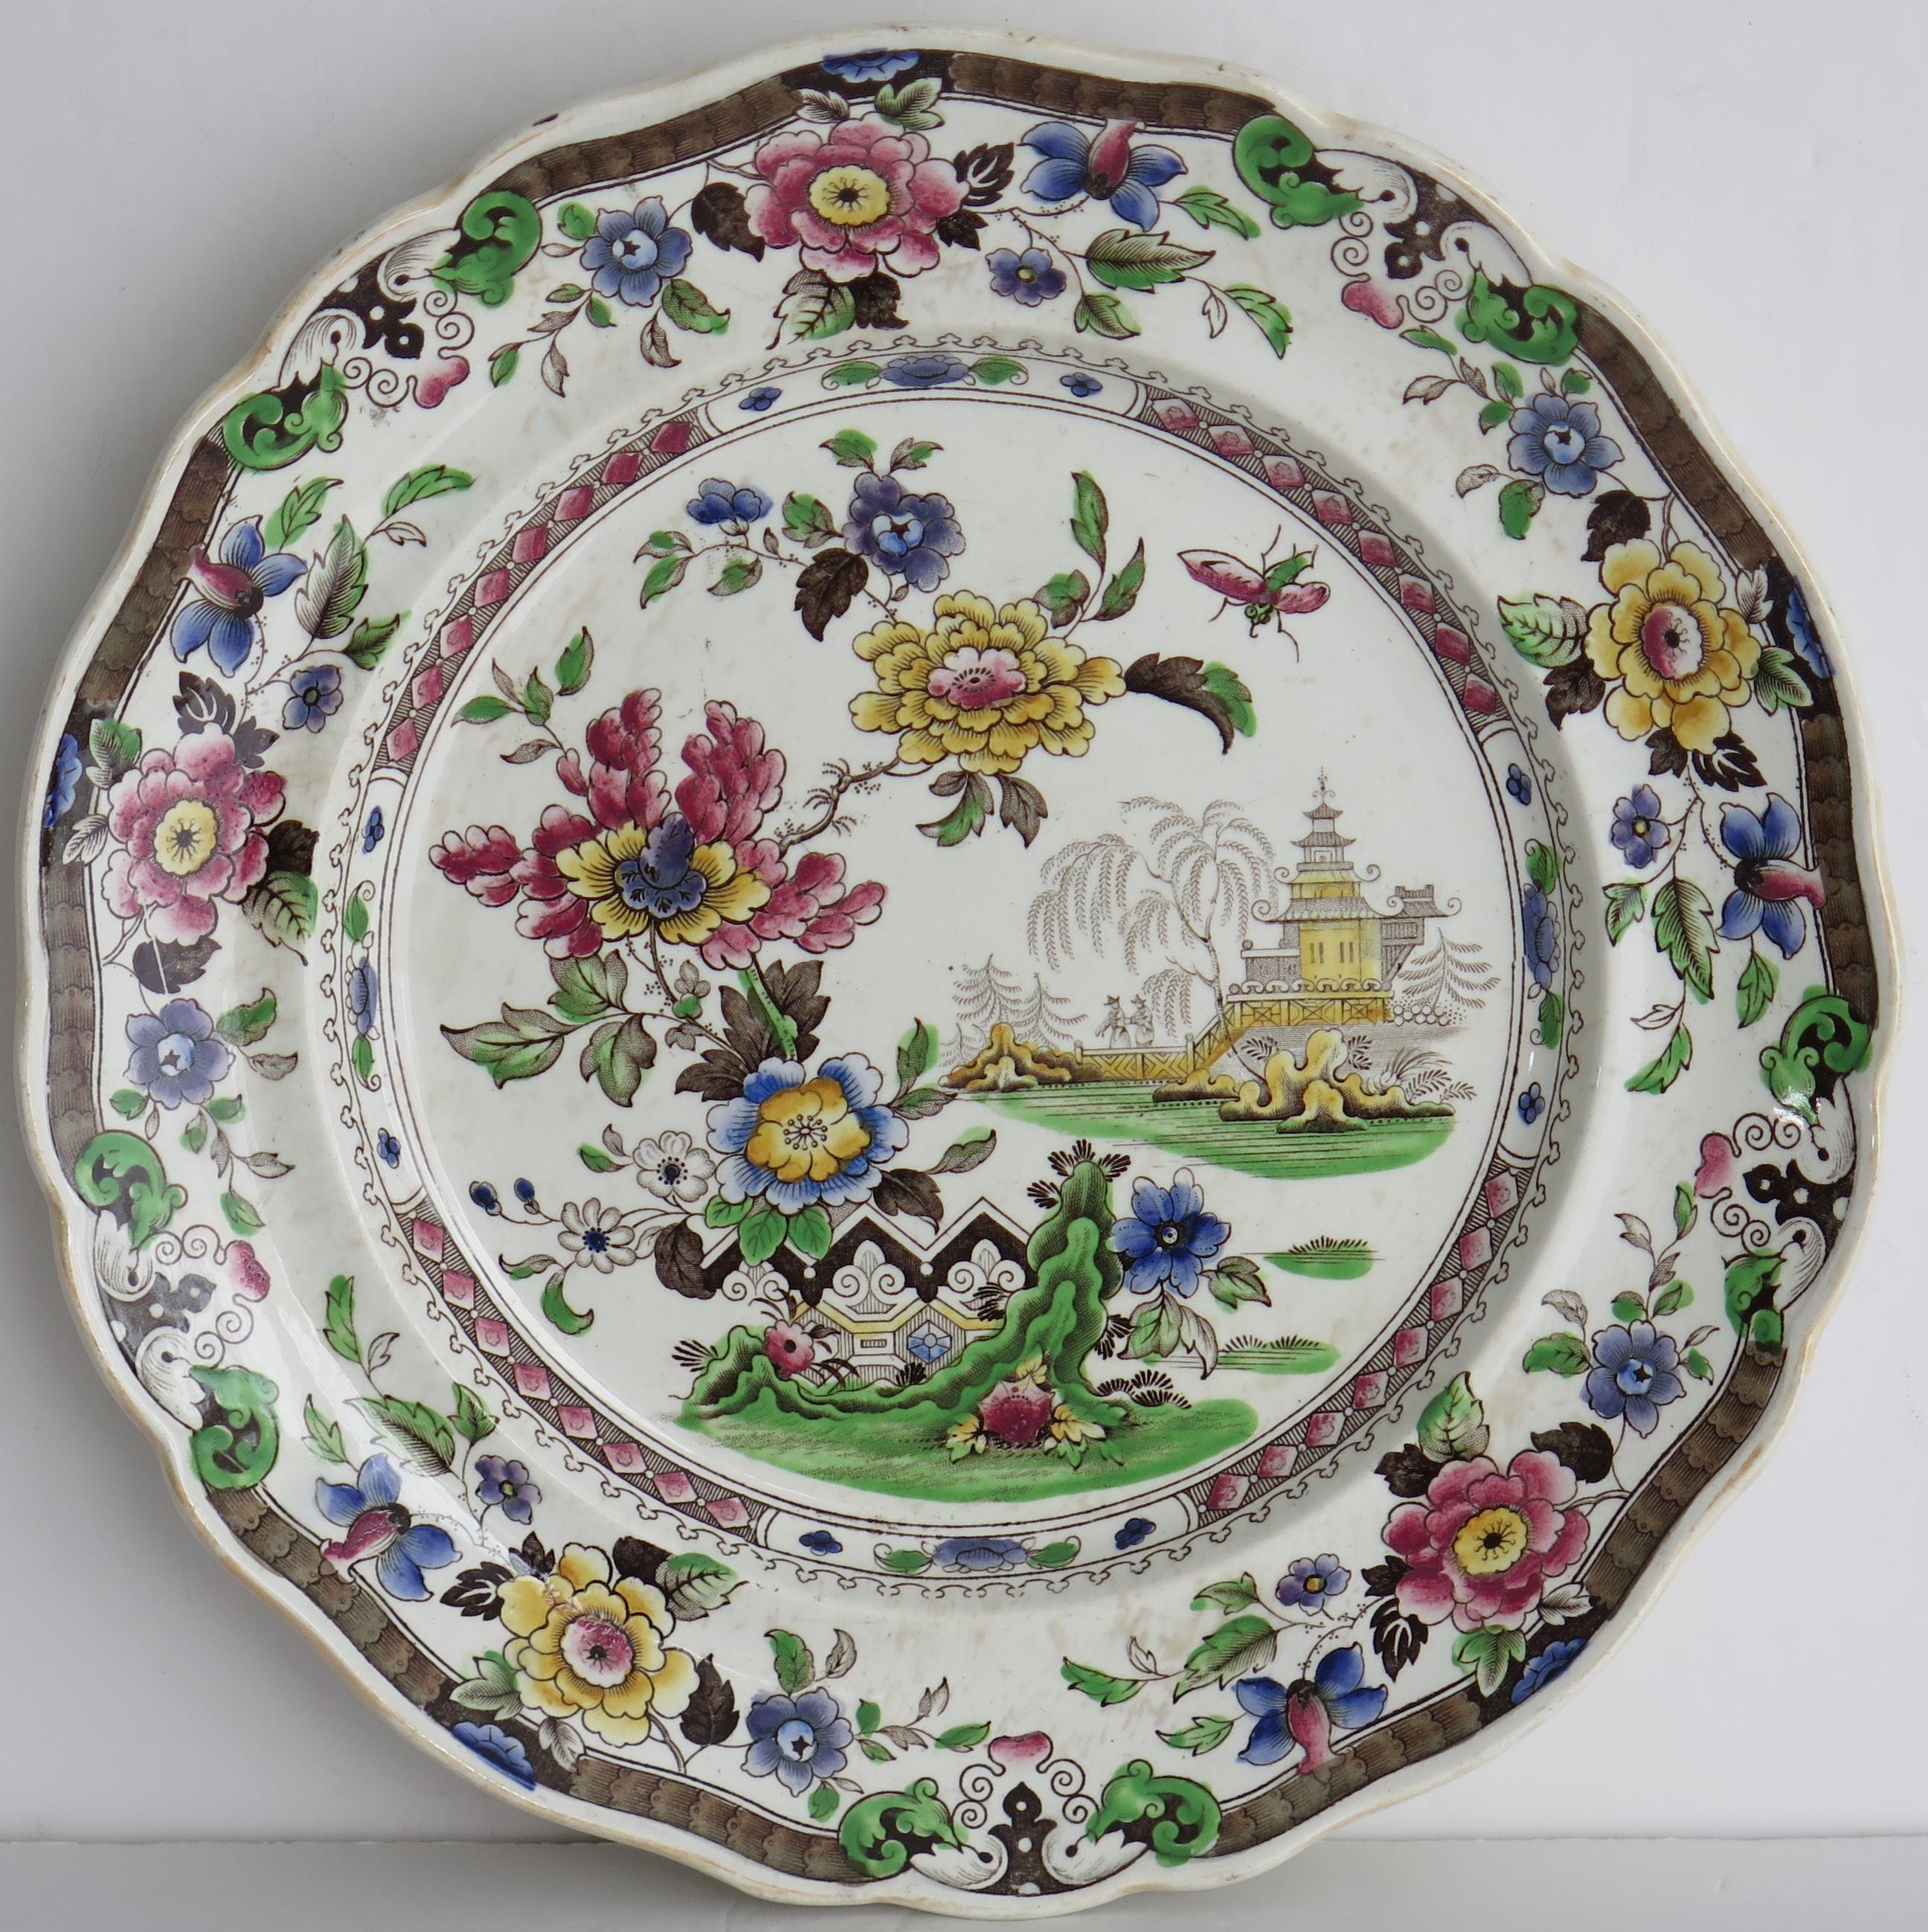 This is a good early decorative large earthenware pottery dinner plates made by Zachariah Boyle of Hanley and Stoke, England, circa 1825.

The plate is well potted with a curvy indented rim.

It has a detailed Chinoiserie pattern depicting a